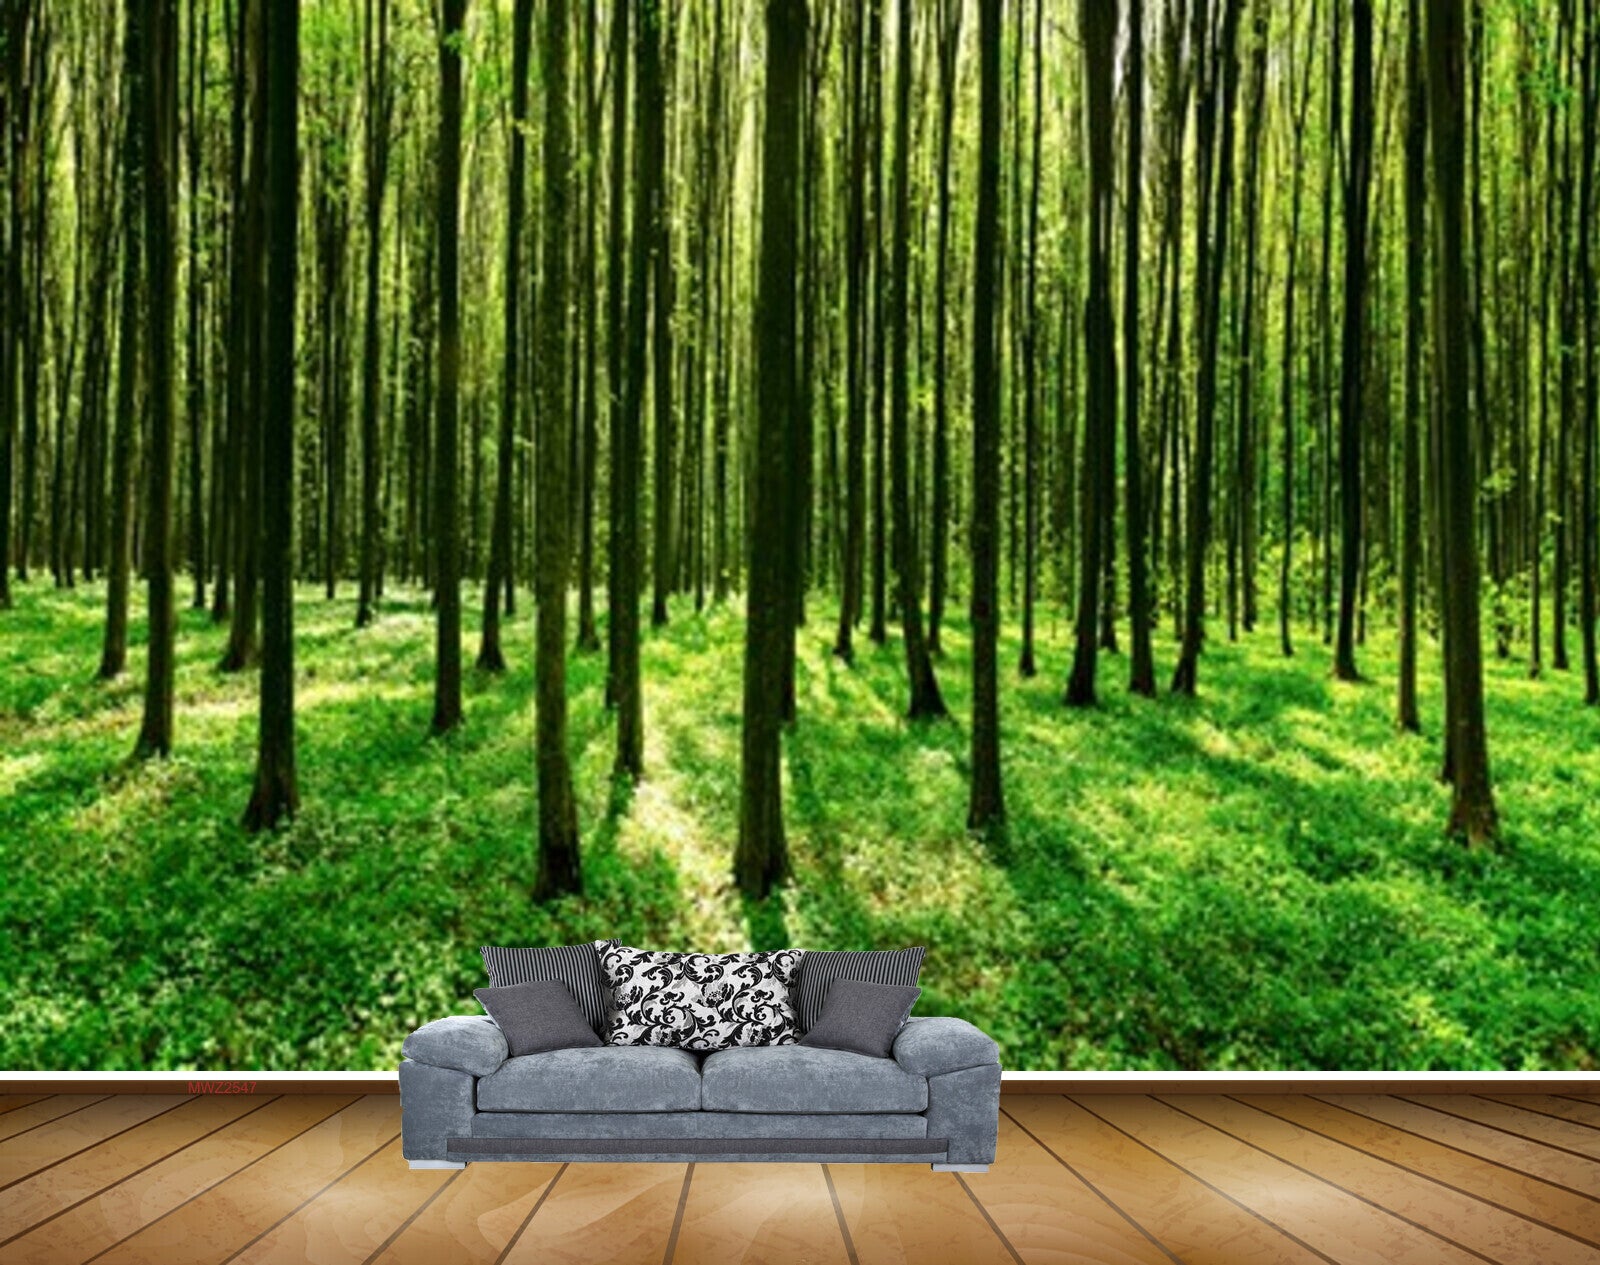 Buy WISDOM Custom Photo Wallpaper 3D Green Forest Nature Landscape Large  Murals Living Room Sofa Bedroom Modern Wall Painting Home Decor Online at  Low Prices in India  Amazonin